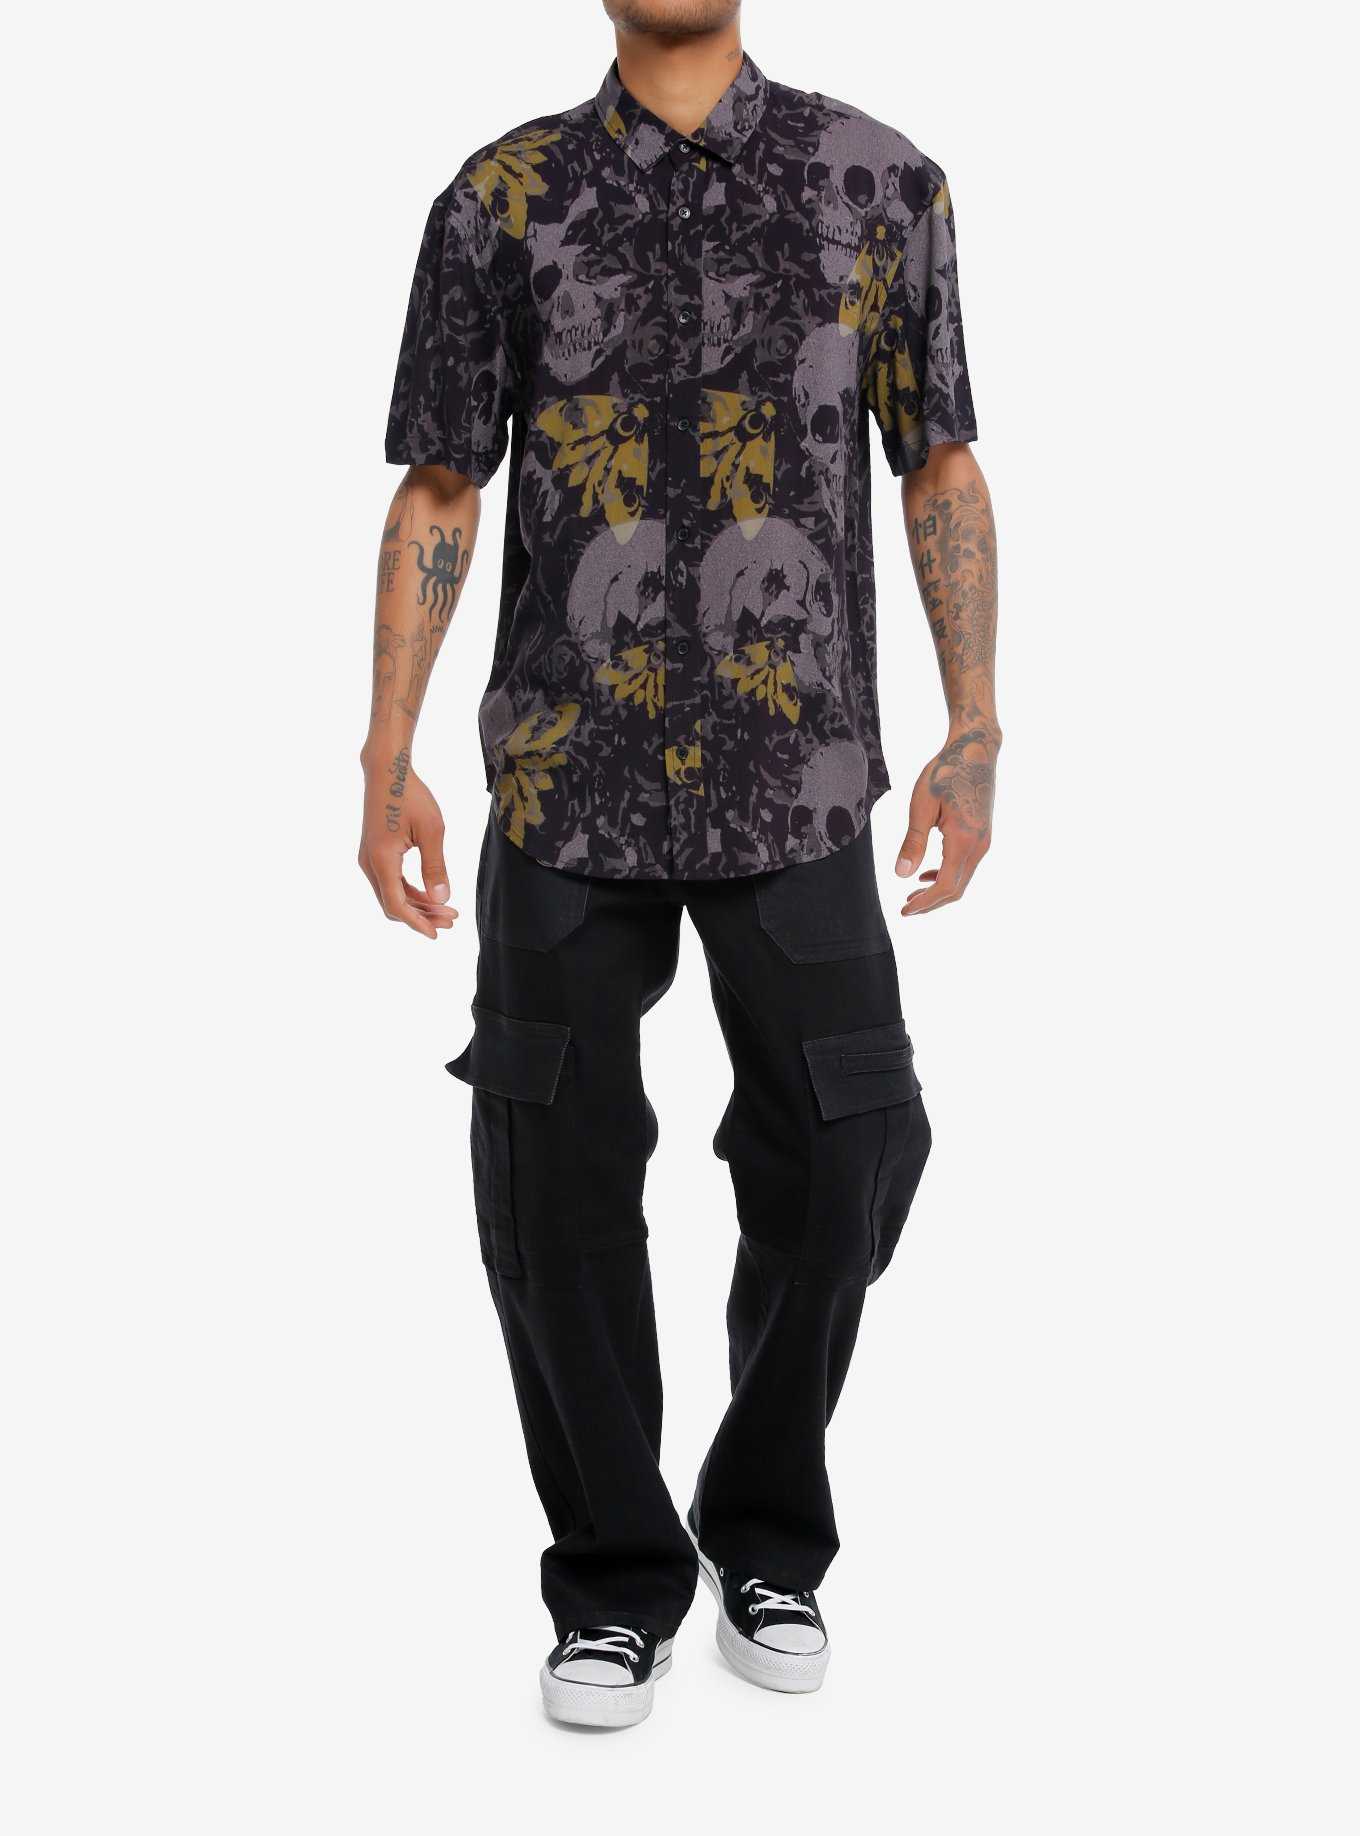 Grunge Skull Moth Woven Button-Up, , hi-res